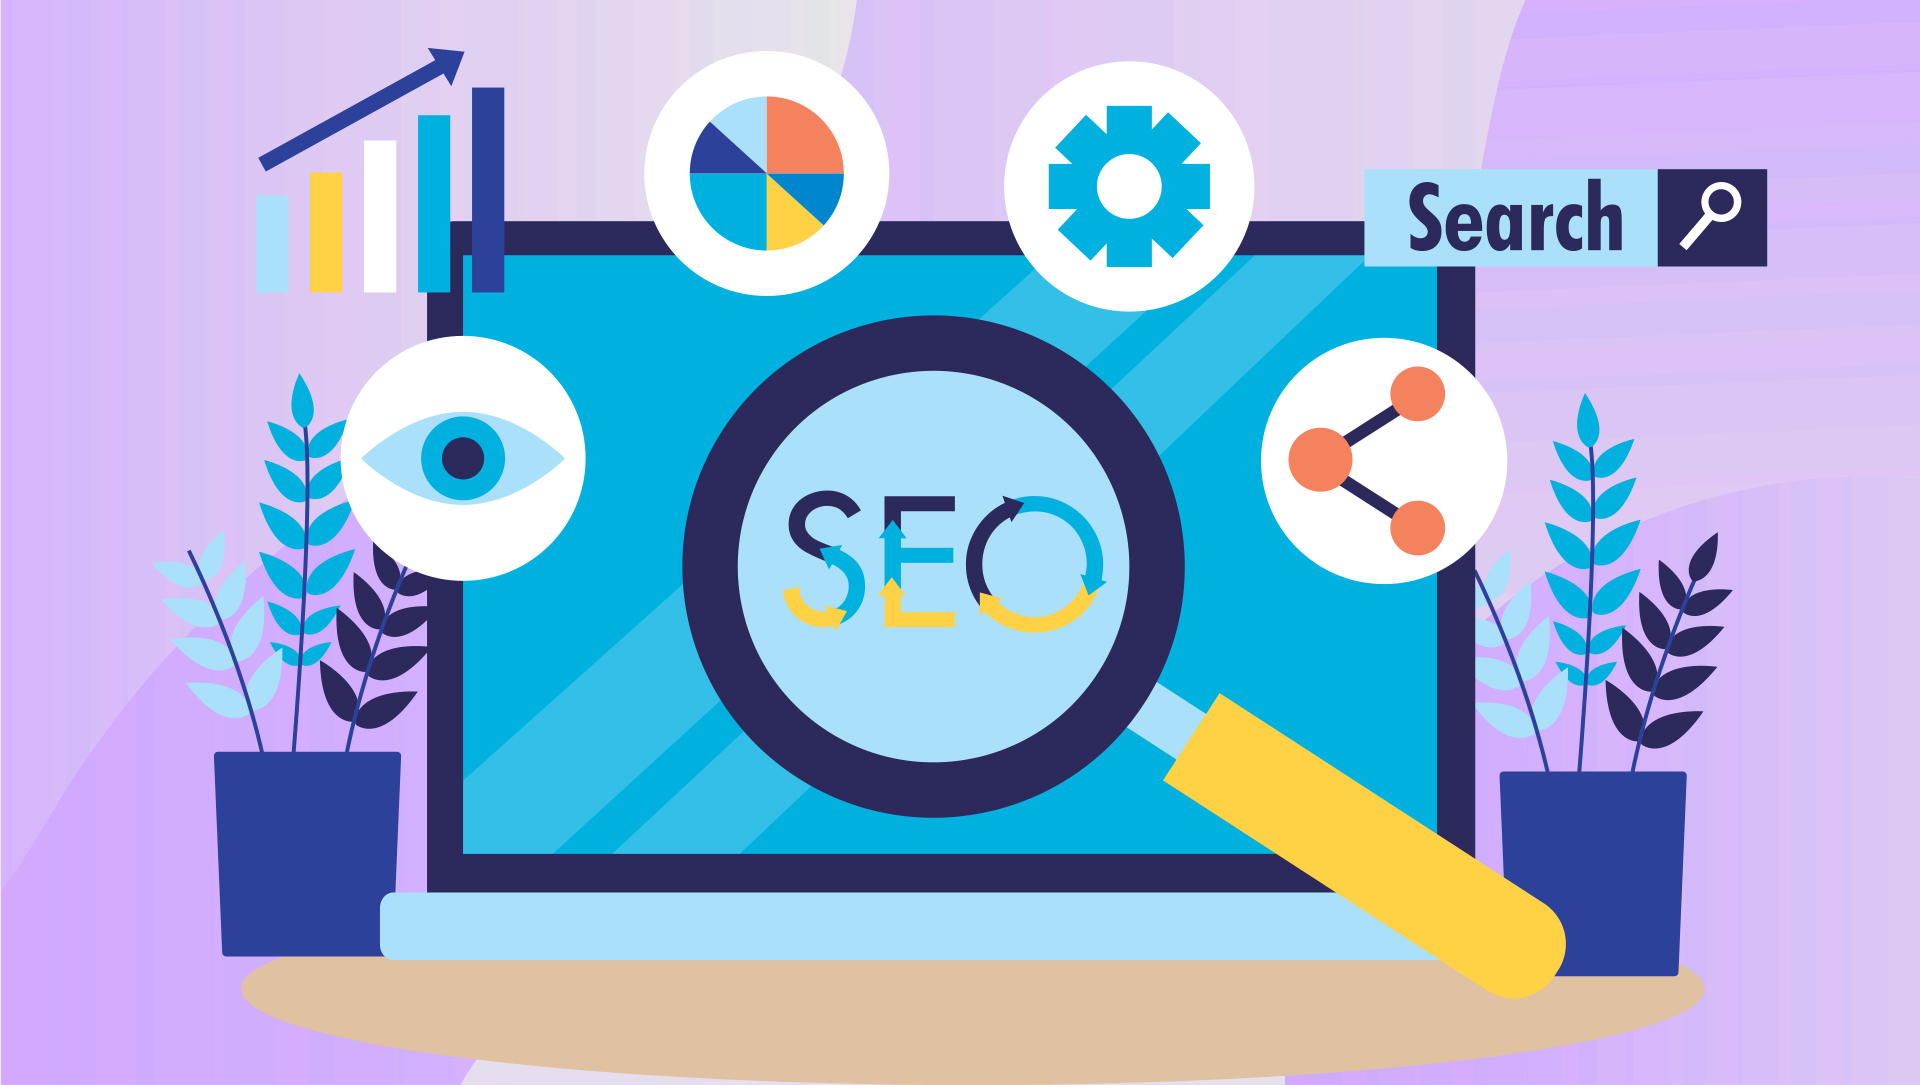 10-best-strategies-to-maximize-seo-roi-related-blog-21